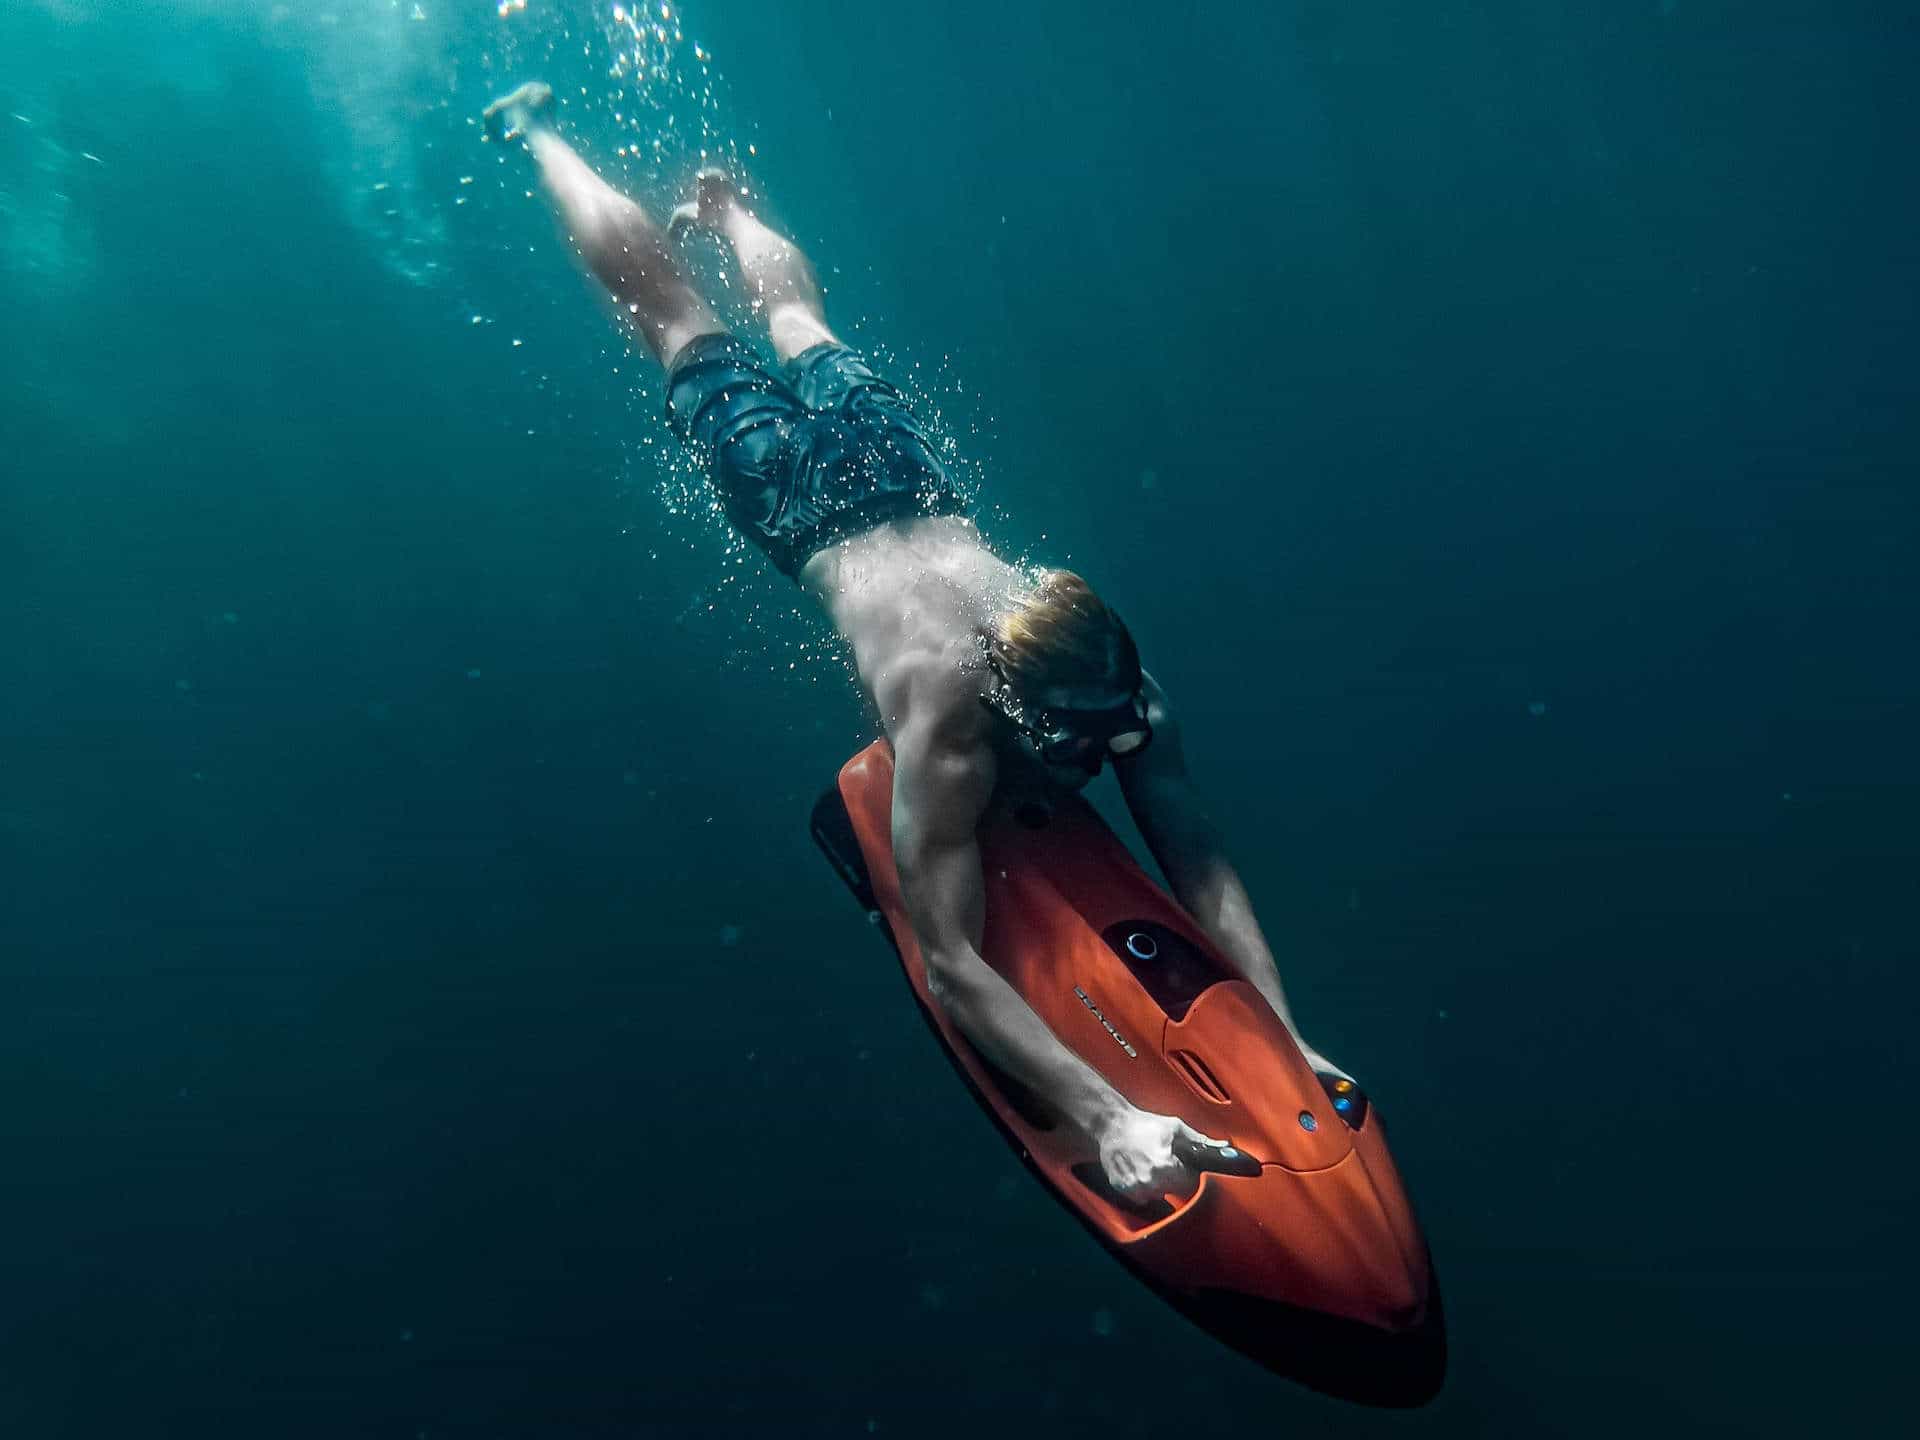 Freediver with underwater scooter